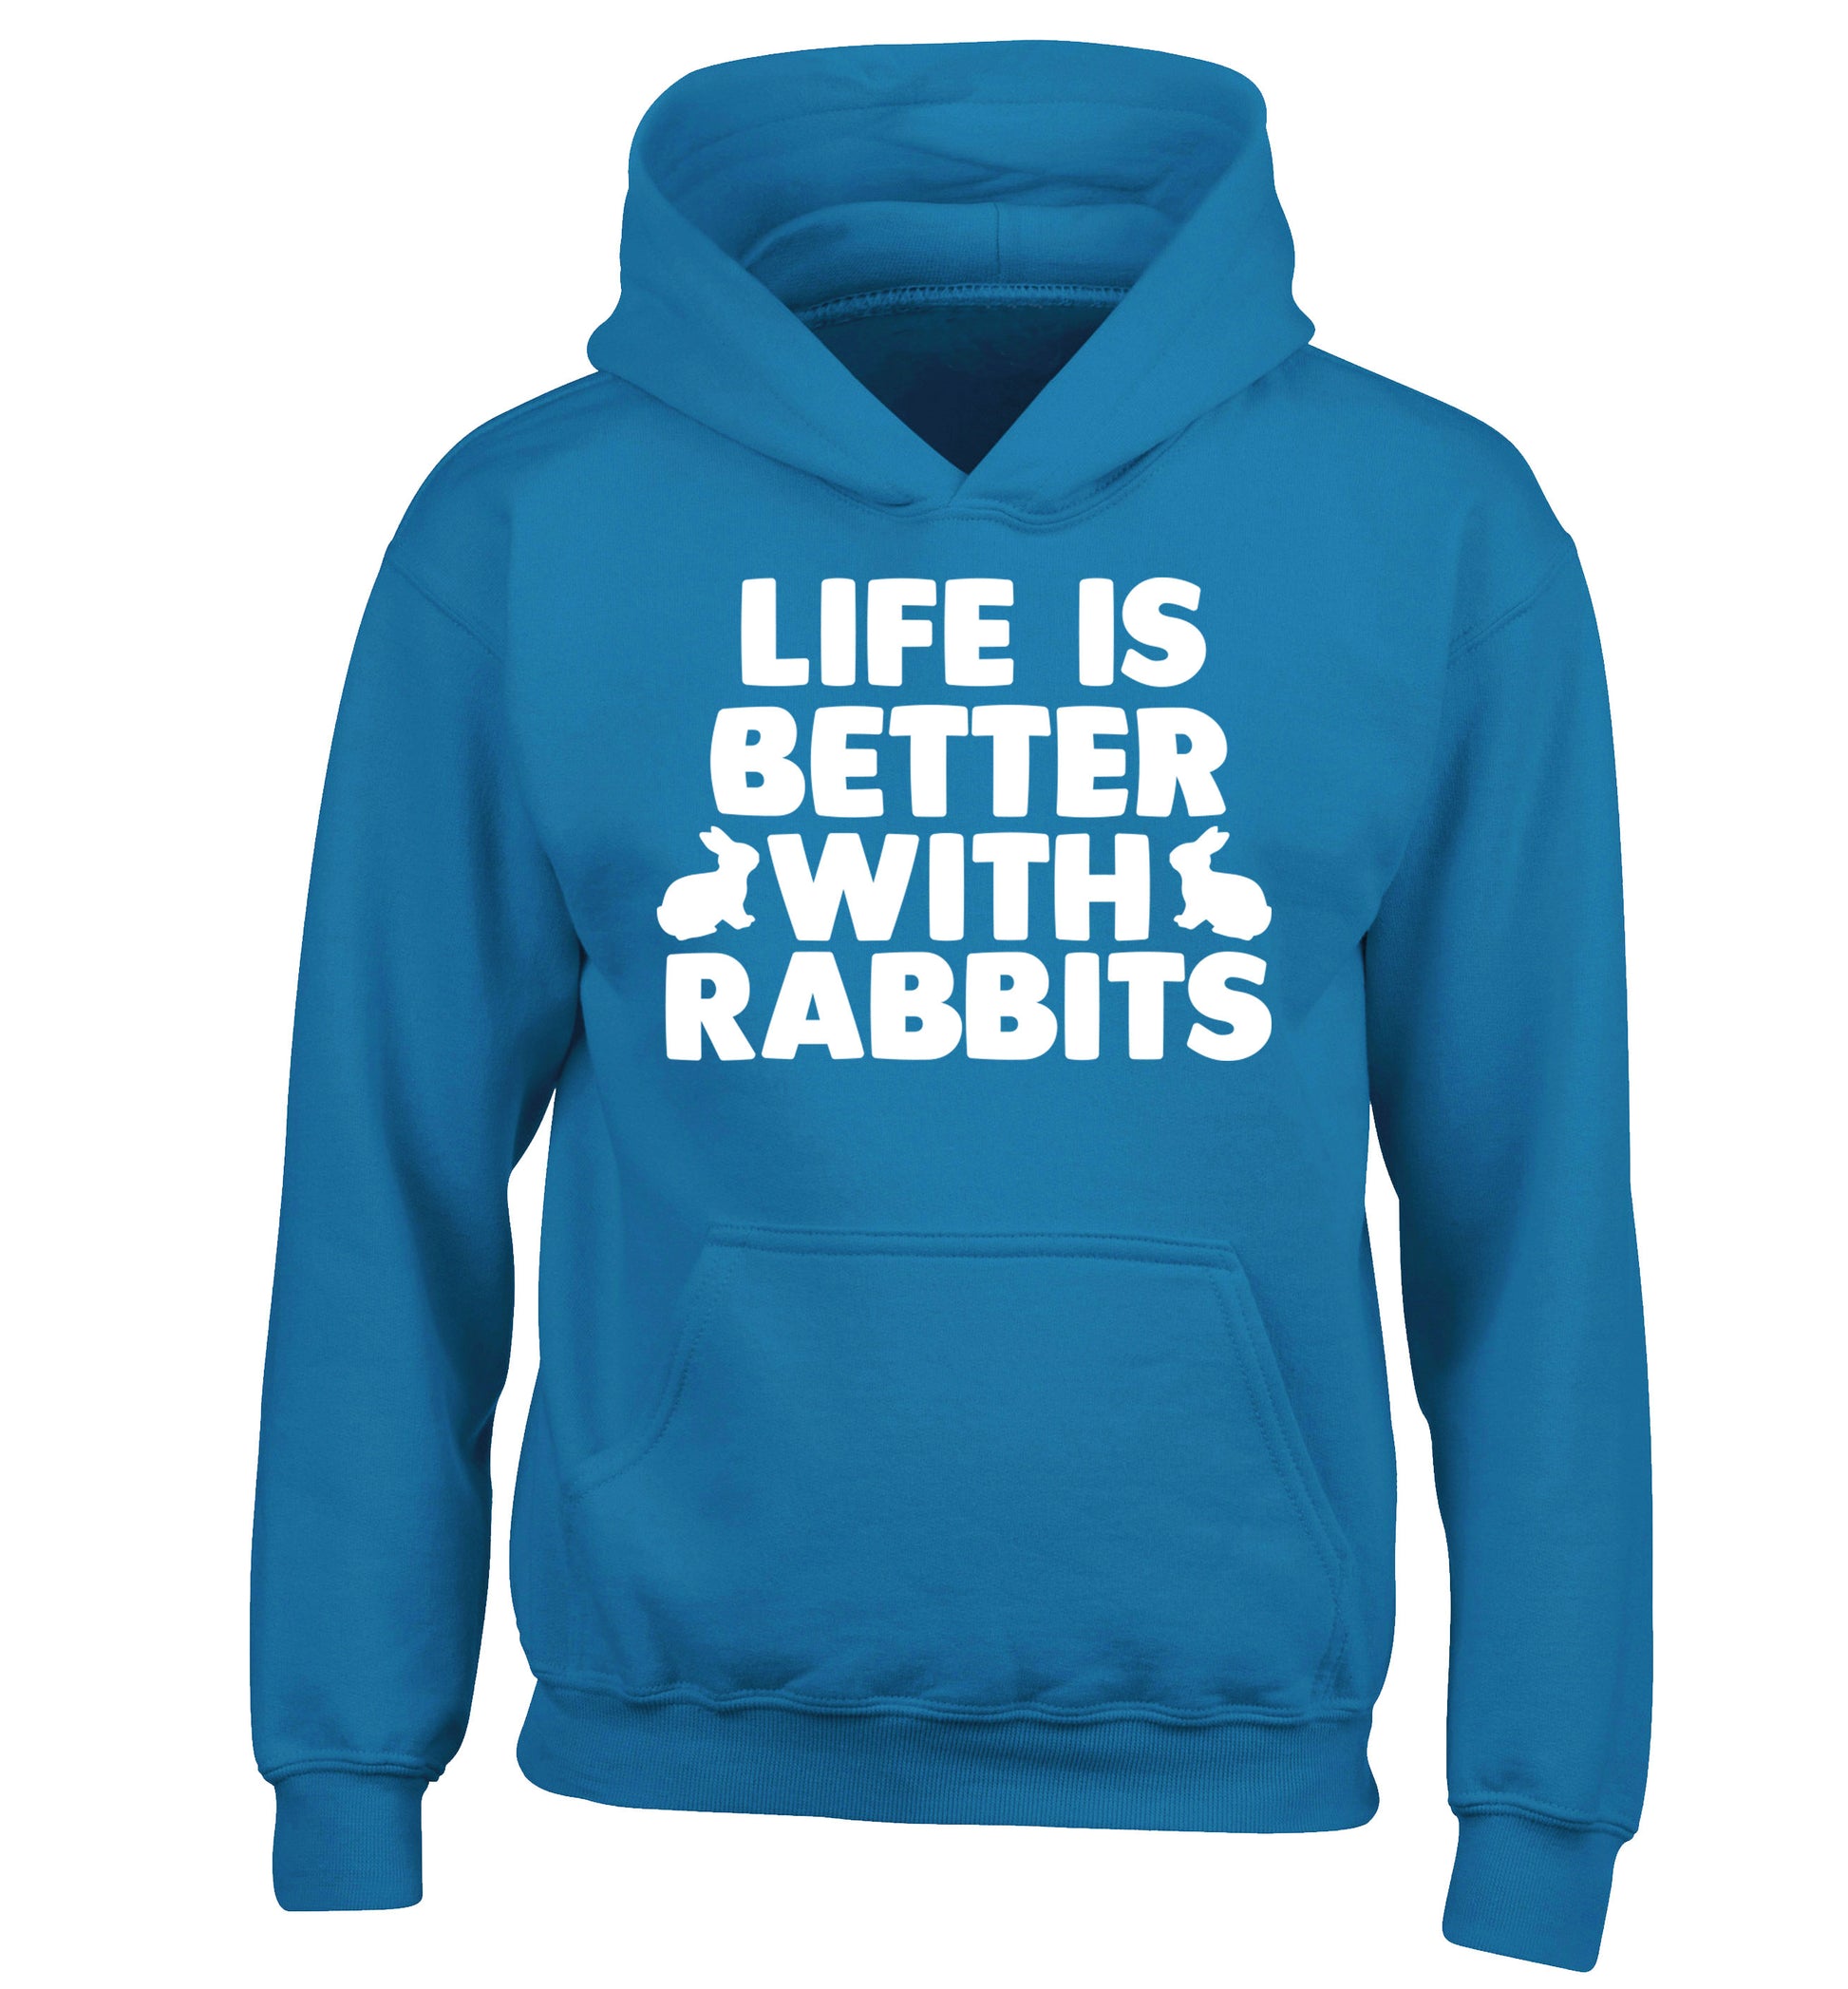 Life is better with rabbits children's blue hoodie 12-14 Years